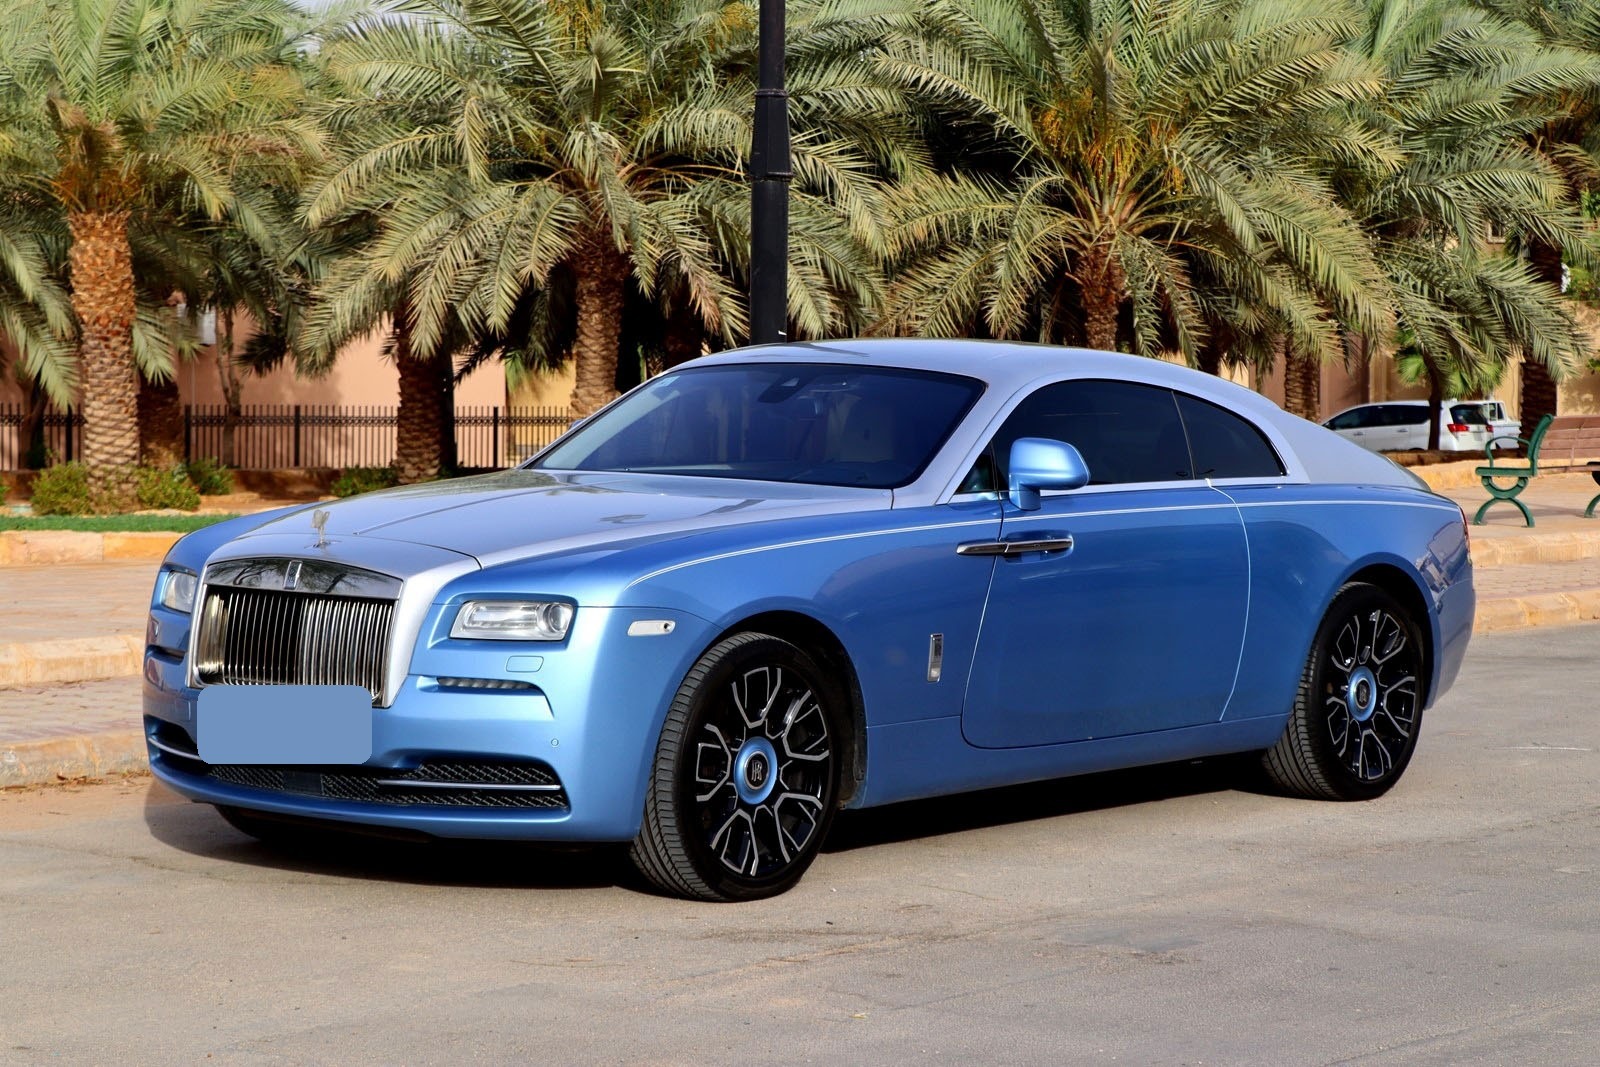 Used 2015 RollsRoyce Wraith Coupe MSRP 383k Only 3k Miles For Sale  Special Pricing  Chicago Motor Cars Stock 15802